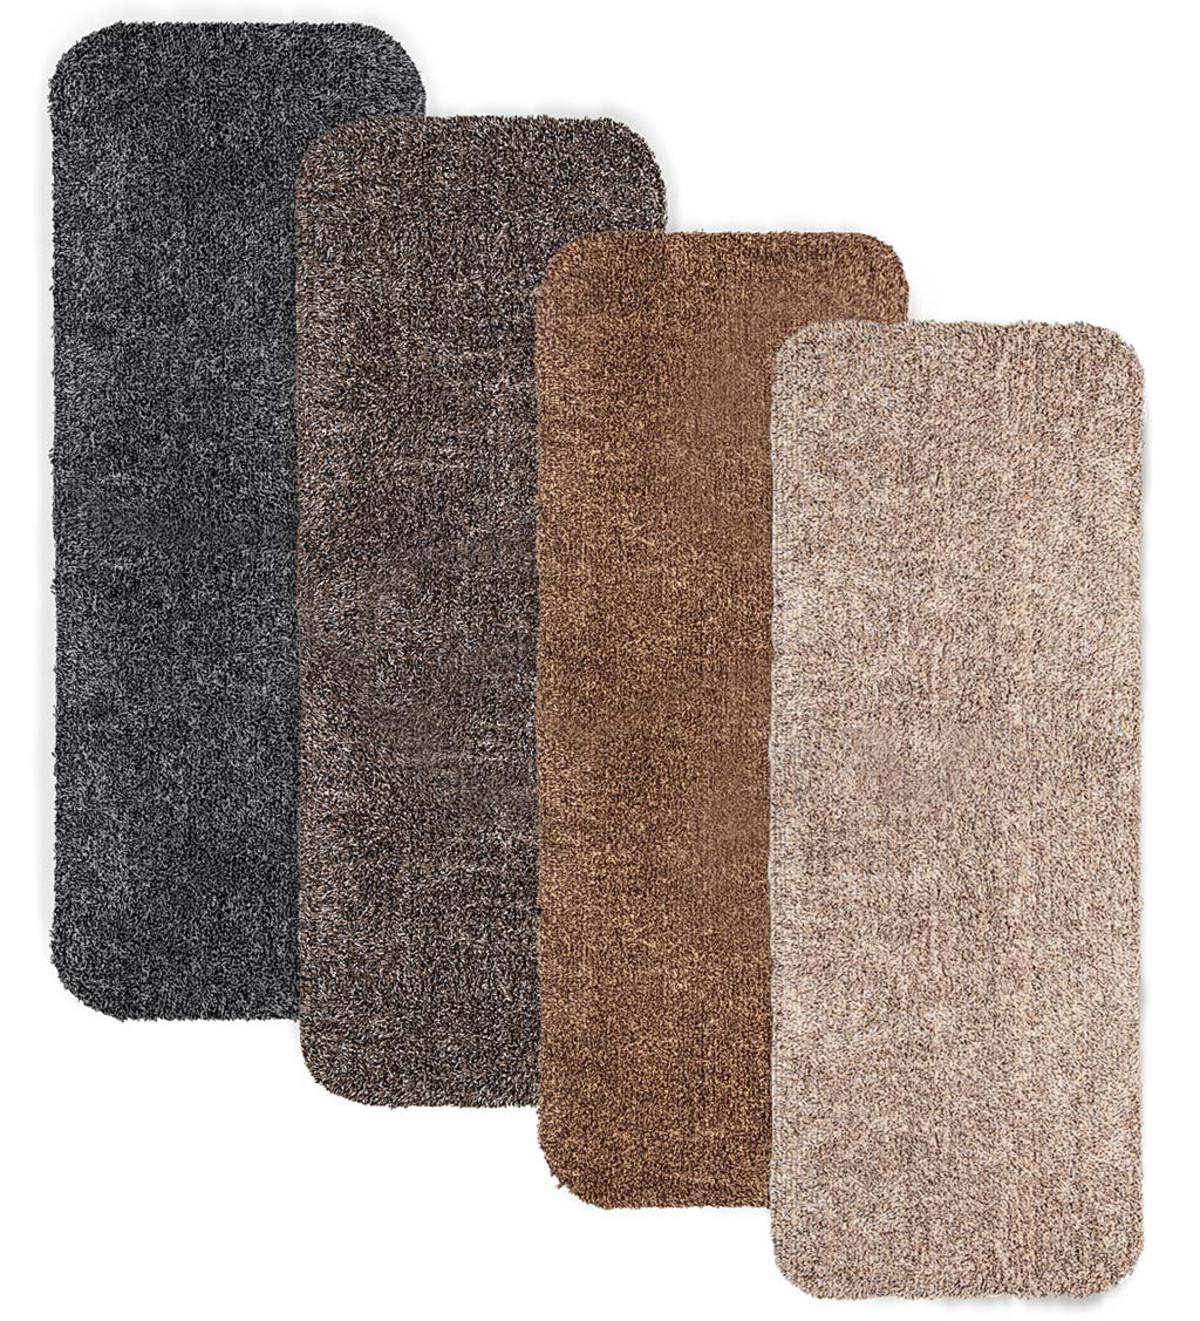 Microfiber Mud Rug With NonSkid Backing, 29" x 58" Runner Brown PlowHearth